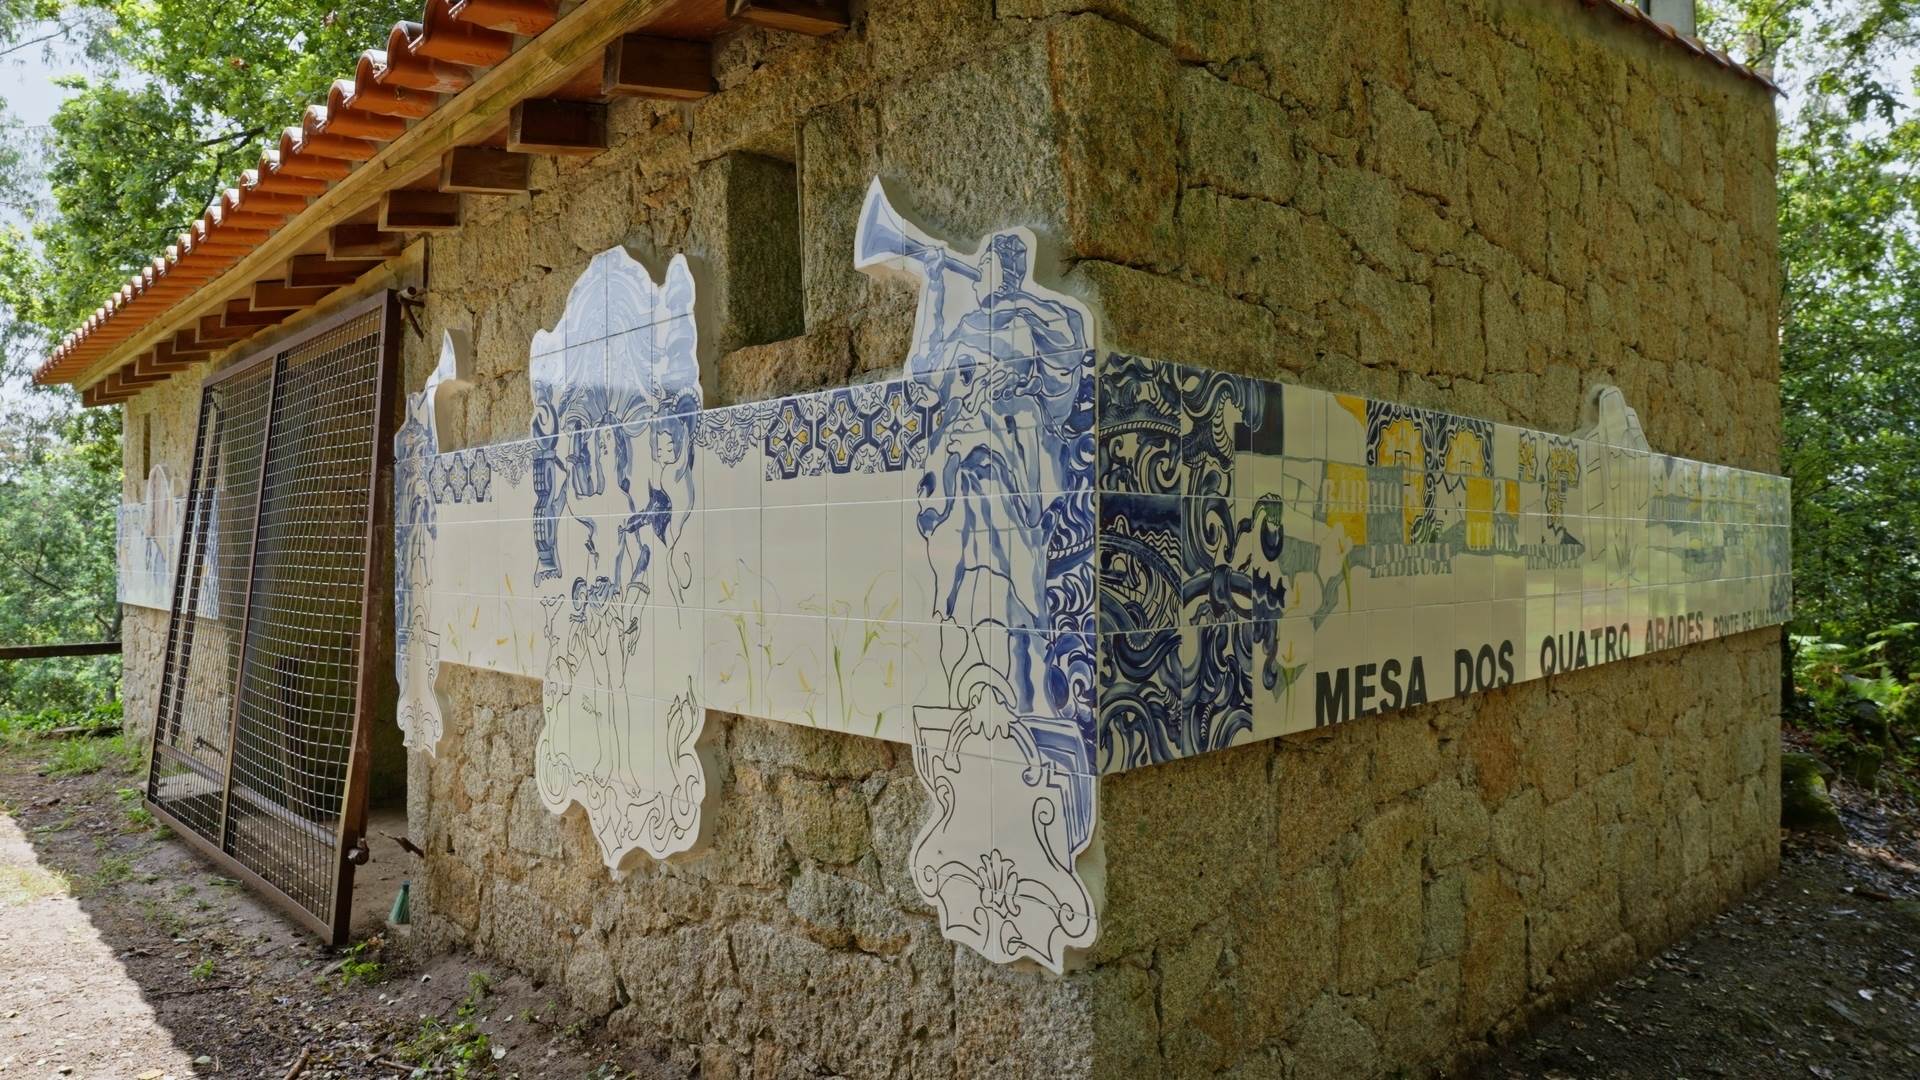 19.06.2022
The Mesa dos Quatro Abades (Table of Four Abbots) is a place for the collective memory of the people of Ponte de Lima, to which the roads of several parishes of this municipality converge. The artist was challenged to intervene in a pre-existing architectural structure, and chose to execute a tile panel. Given its characteristics, the set was divided into three parts.
The part facing the road deals with the issue of institutional cartography, represented by the table, the benches and a sketch of the compass rose. The names of all the parishes appear as if they were interventions in the urban space with mouldings. The whole top part departs from the idea of the traditional tile (15x15cm), despite being painted on a 20x20cm tile. This top is inspired by the carpet tiles that cover part of the facades and panelling of local churches. As it gets lower we move from traditional to contemporary, from excess to simplicity.
In the central part is the figure of Saint Sebastian, a figure that each of the parishes carried in procession to the Mesa dos Quatro Abades (Table of the Four Abbots). The figure of Saint Sebastian is flanked by two angels playing the trumpets, alluding to religious matters. The last part refers to more popular issues, such as pilgrimage and pastoralism.